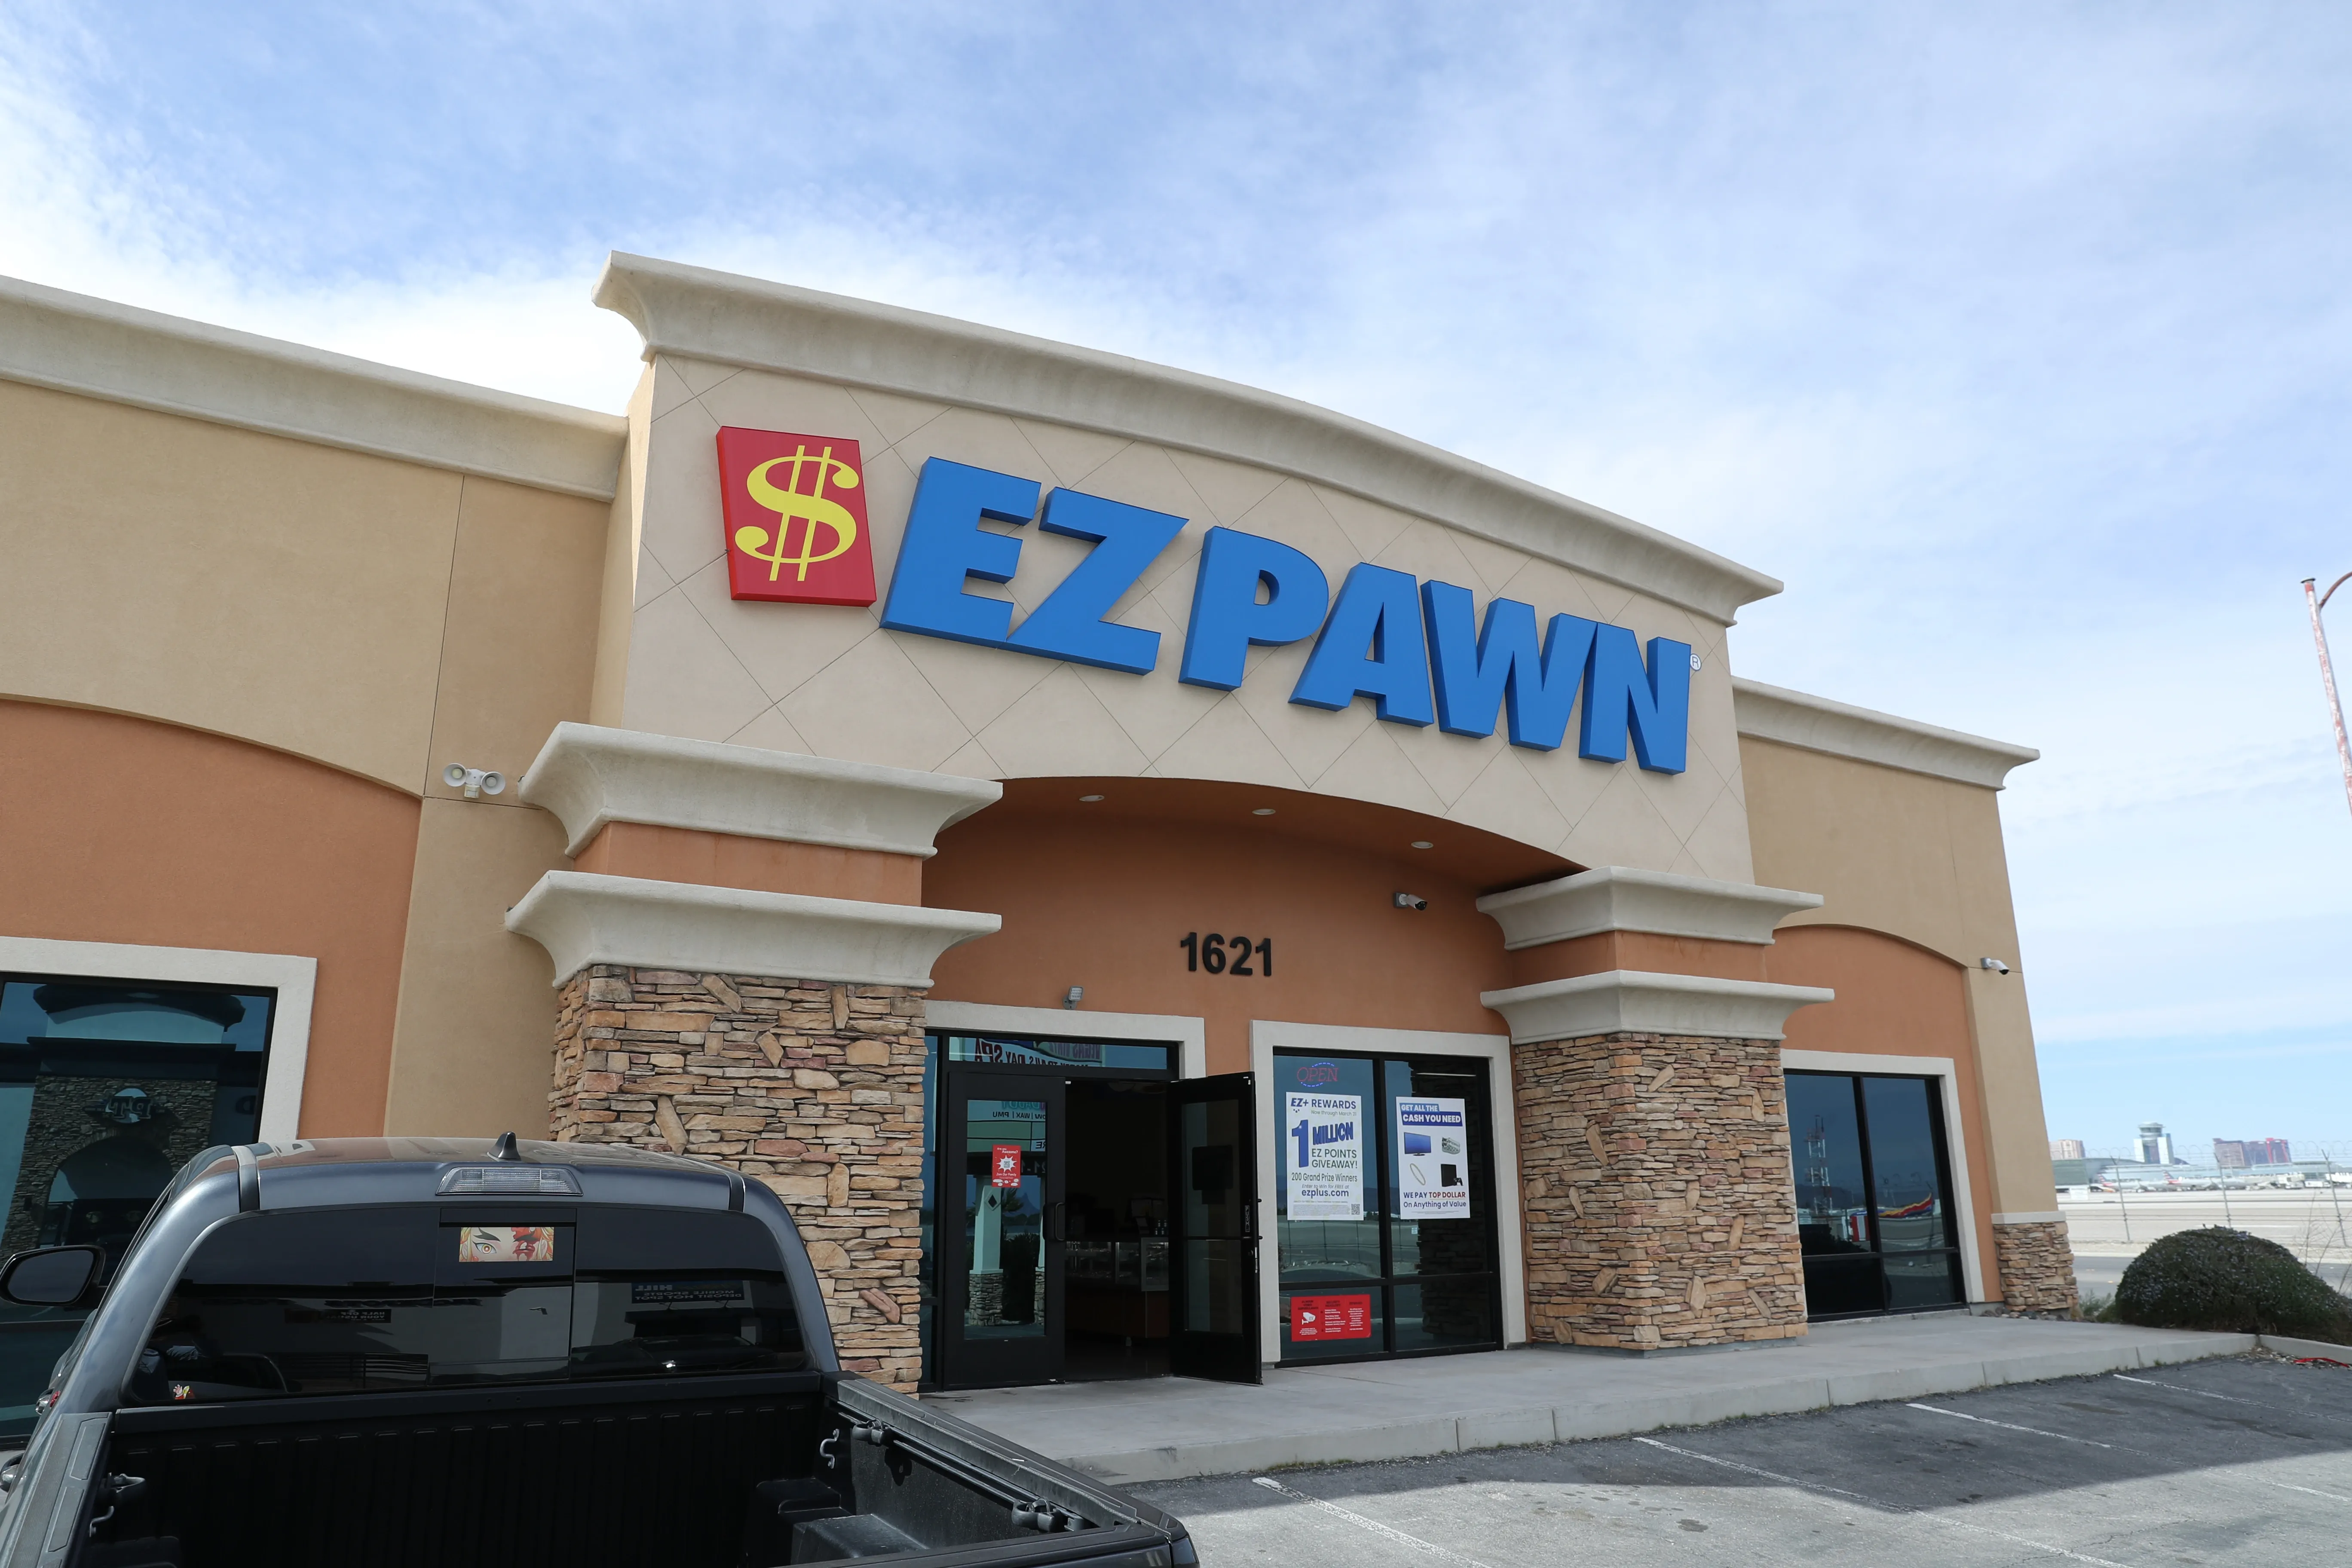 A picture of an EZPAWN store with a truck parked in the parking lot.